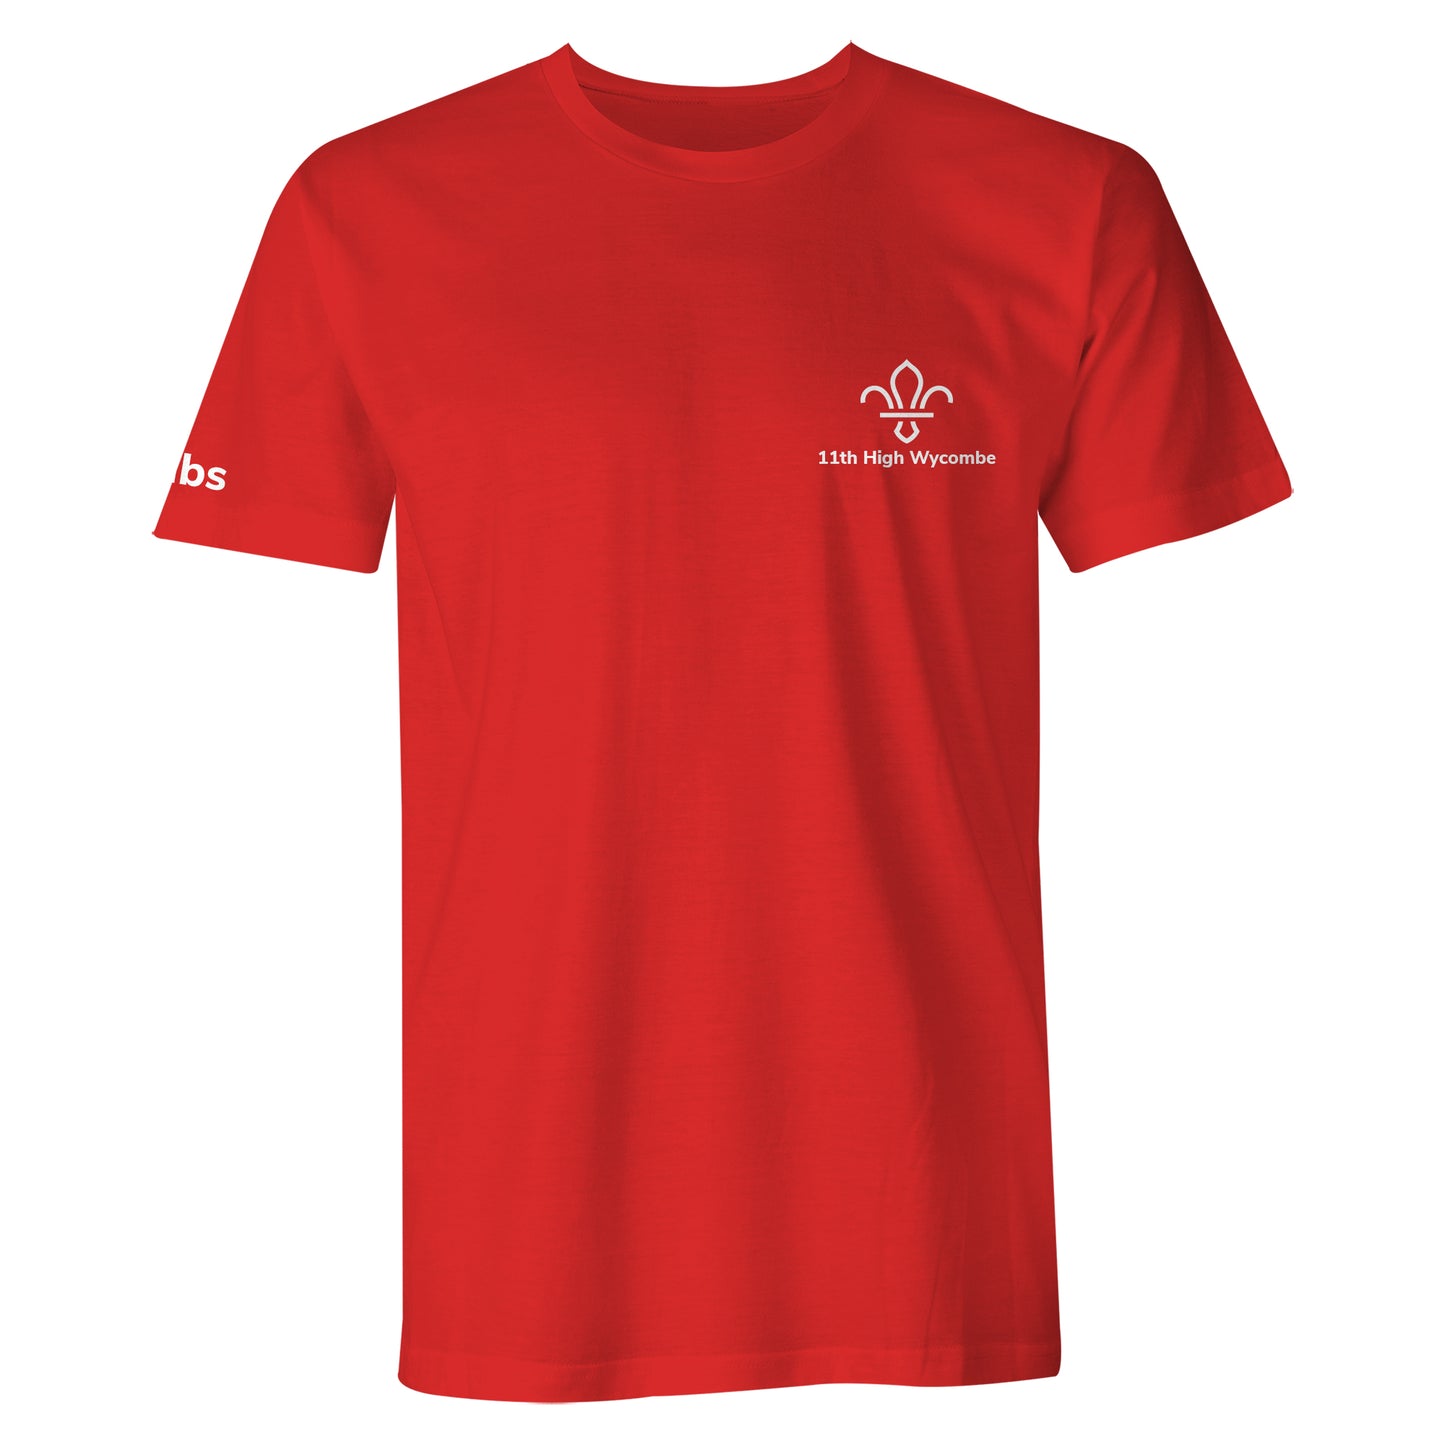 11th High Wycombe Phoenix Red T-Shirt Cubs